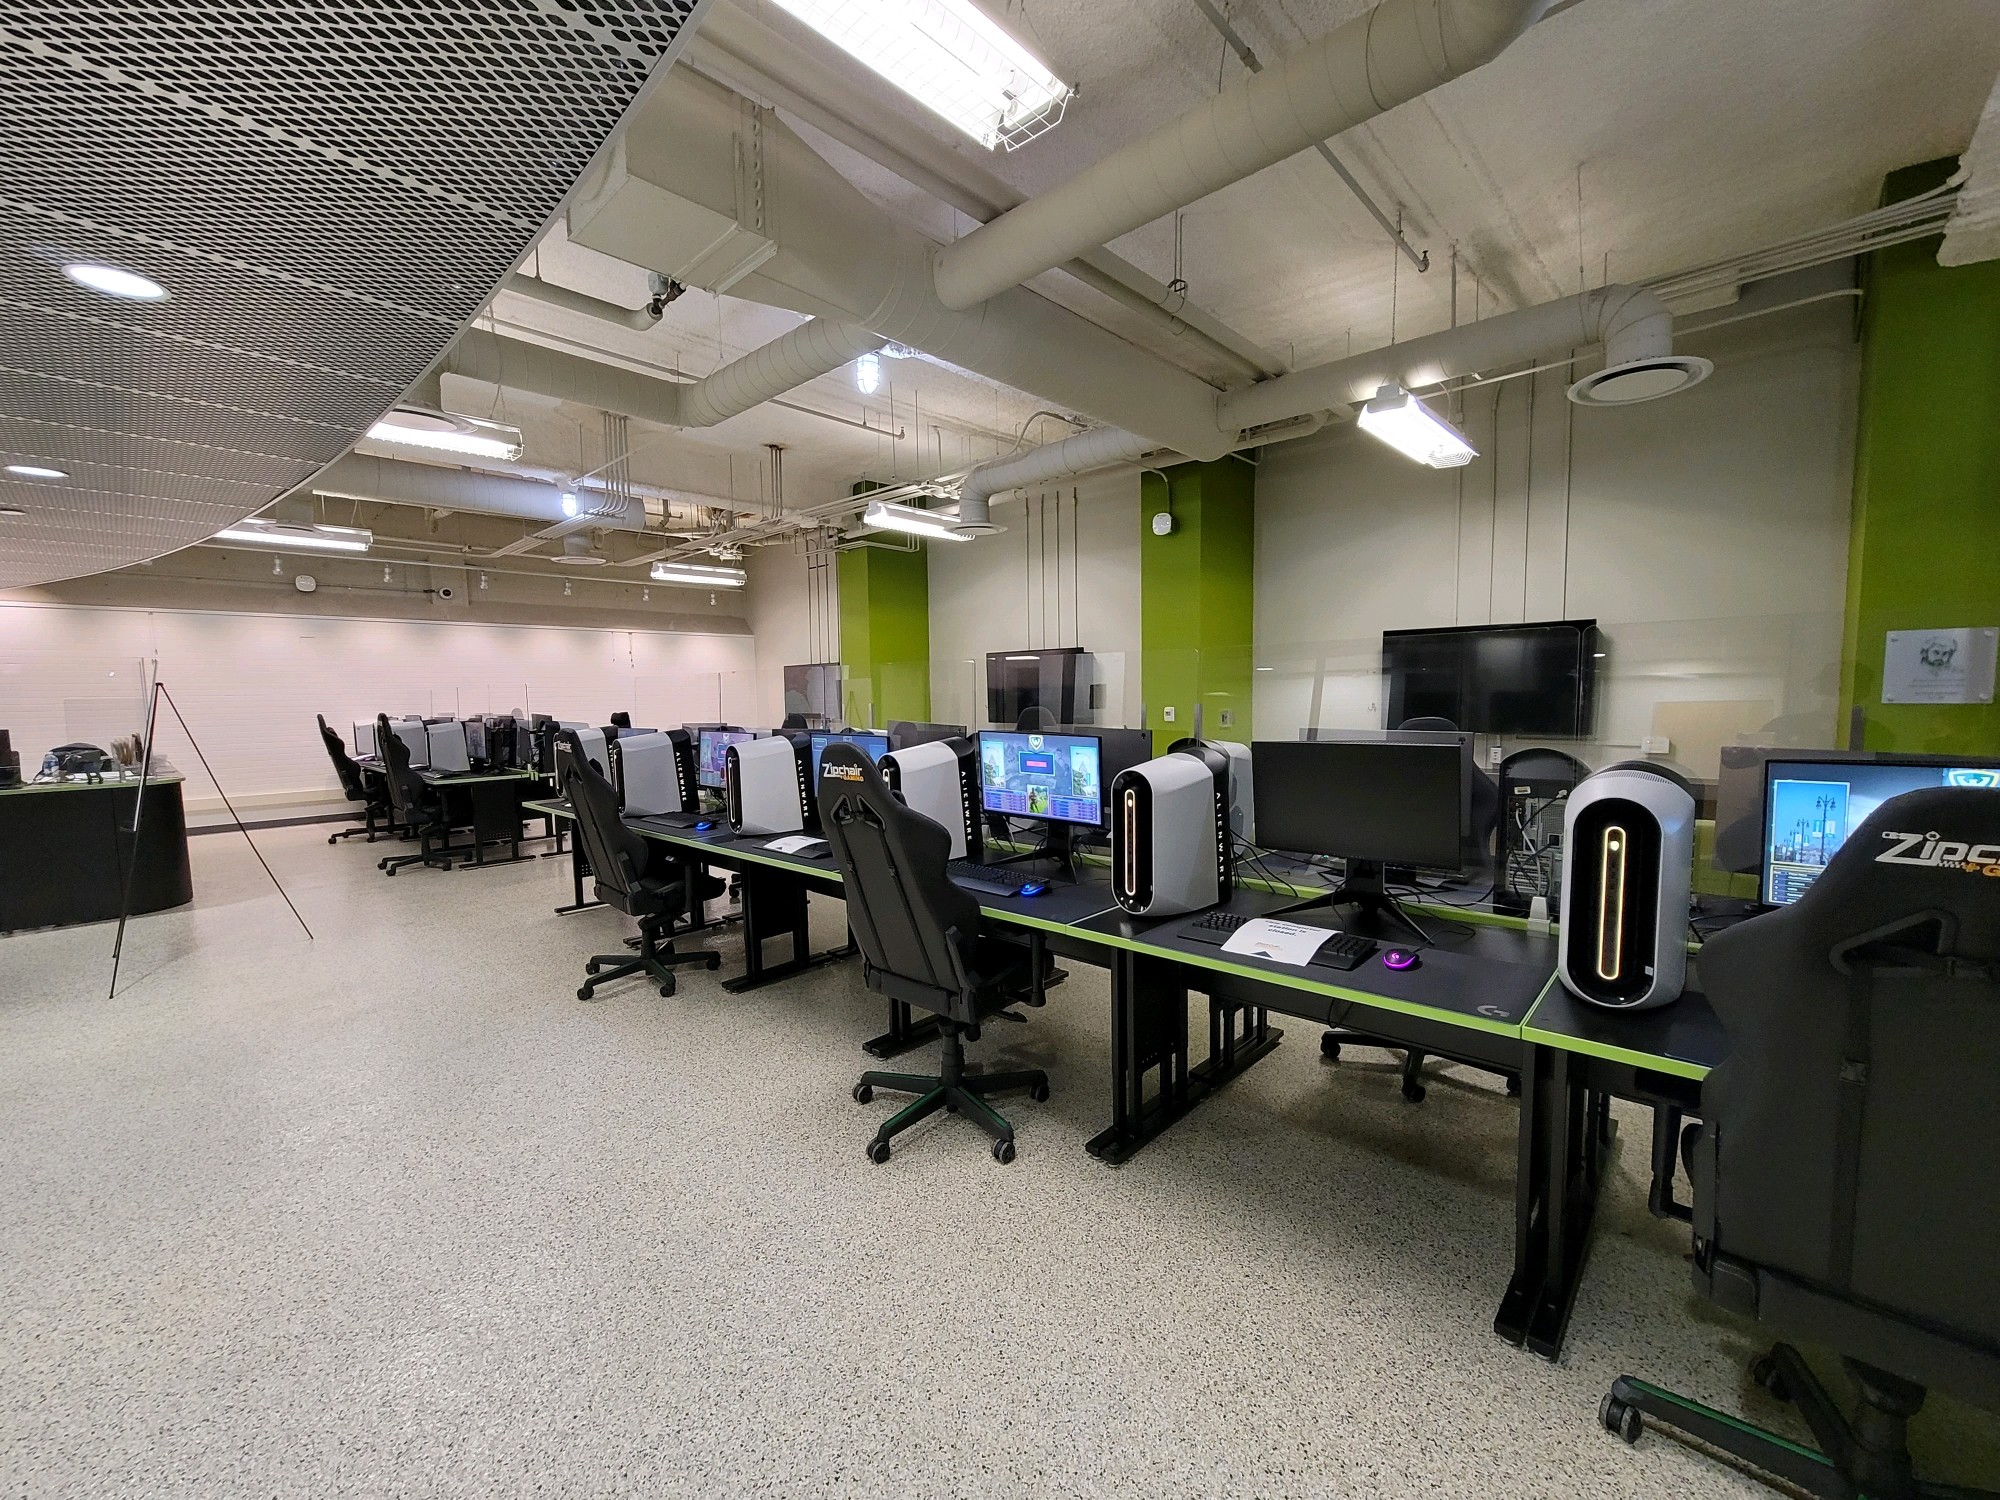 Image of the esports facility showing multiple workstations with computers, a staff desk area and BYOD tv stations.